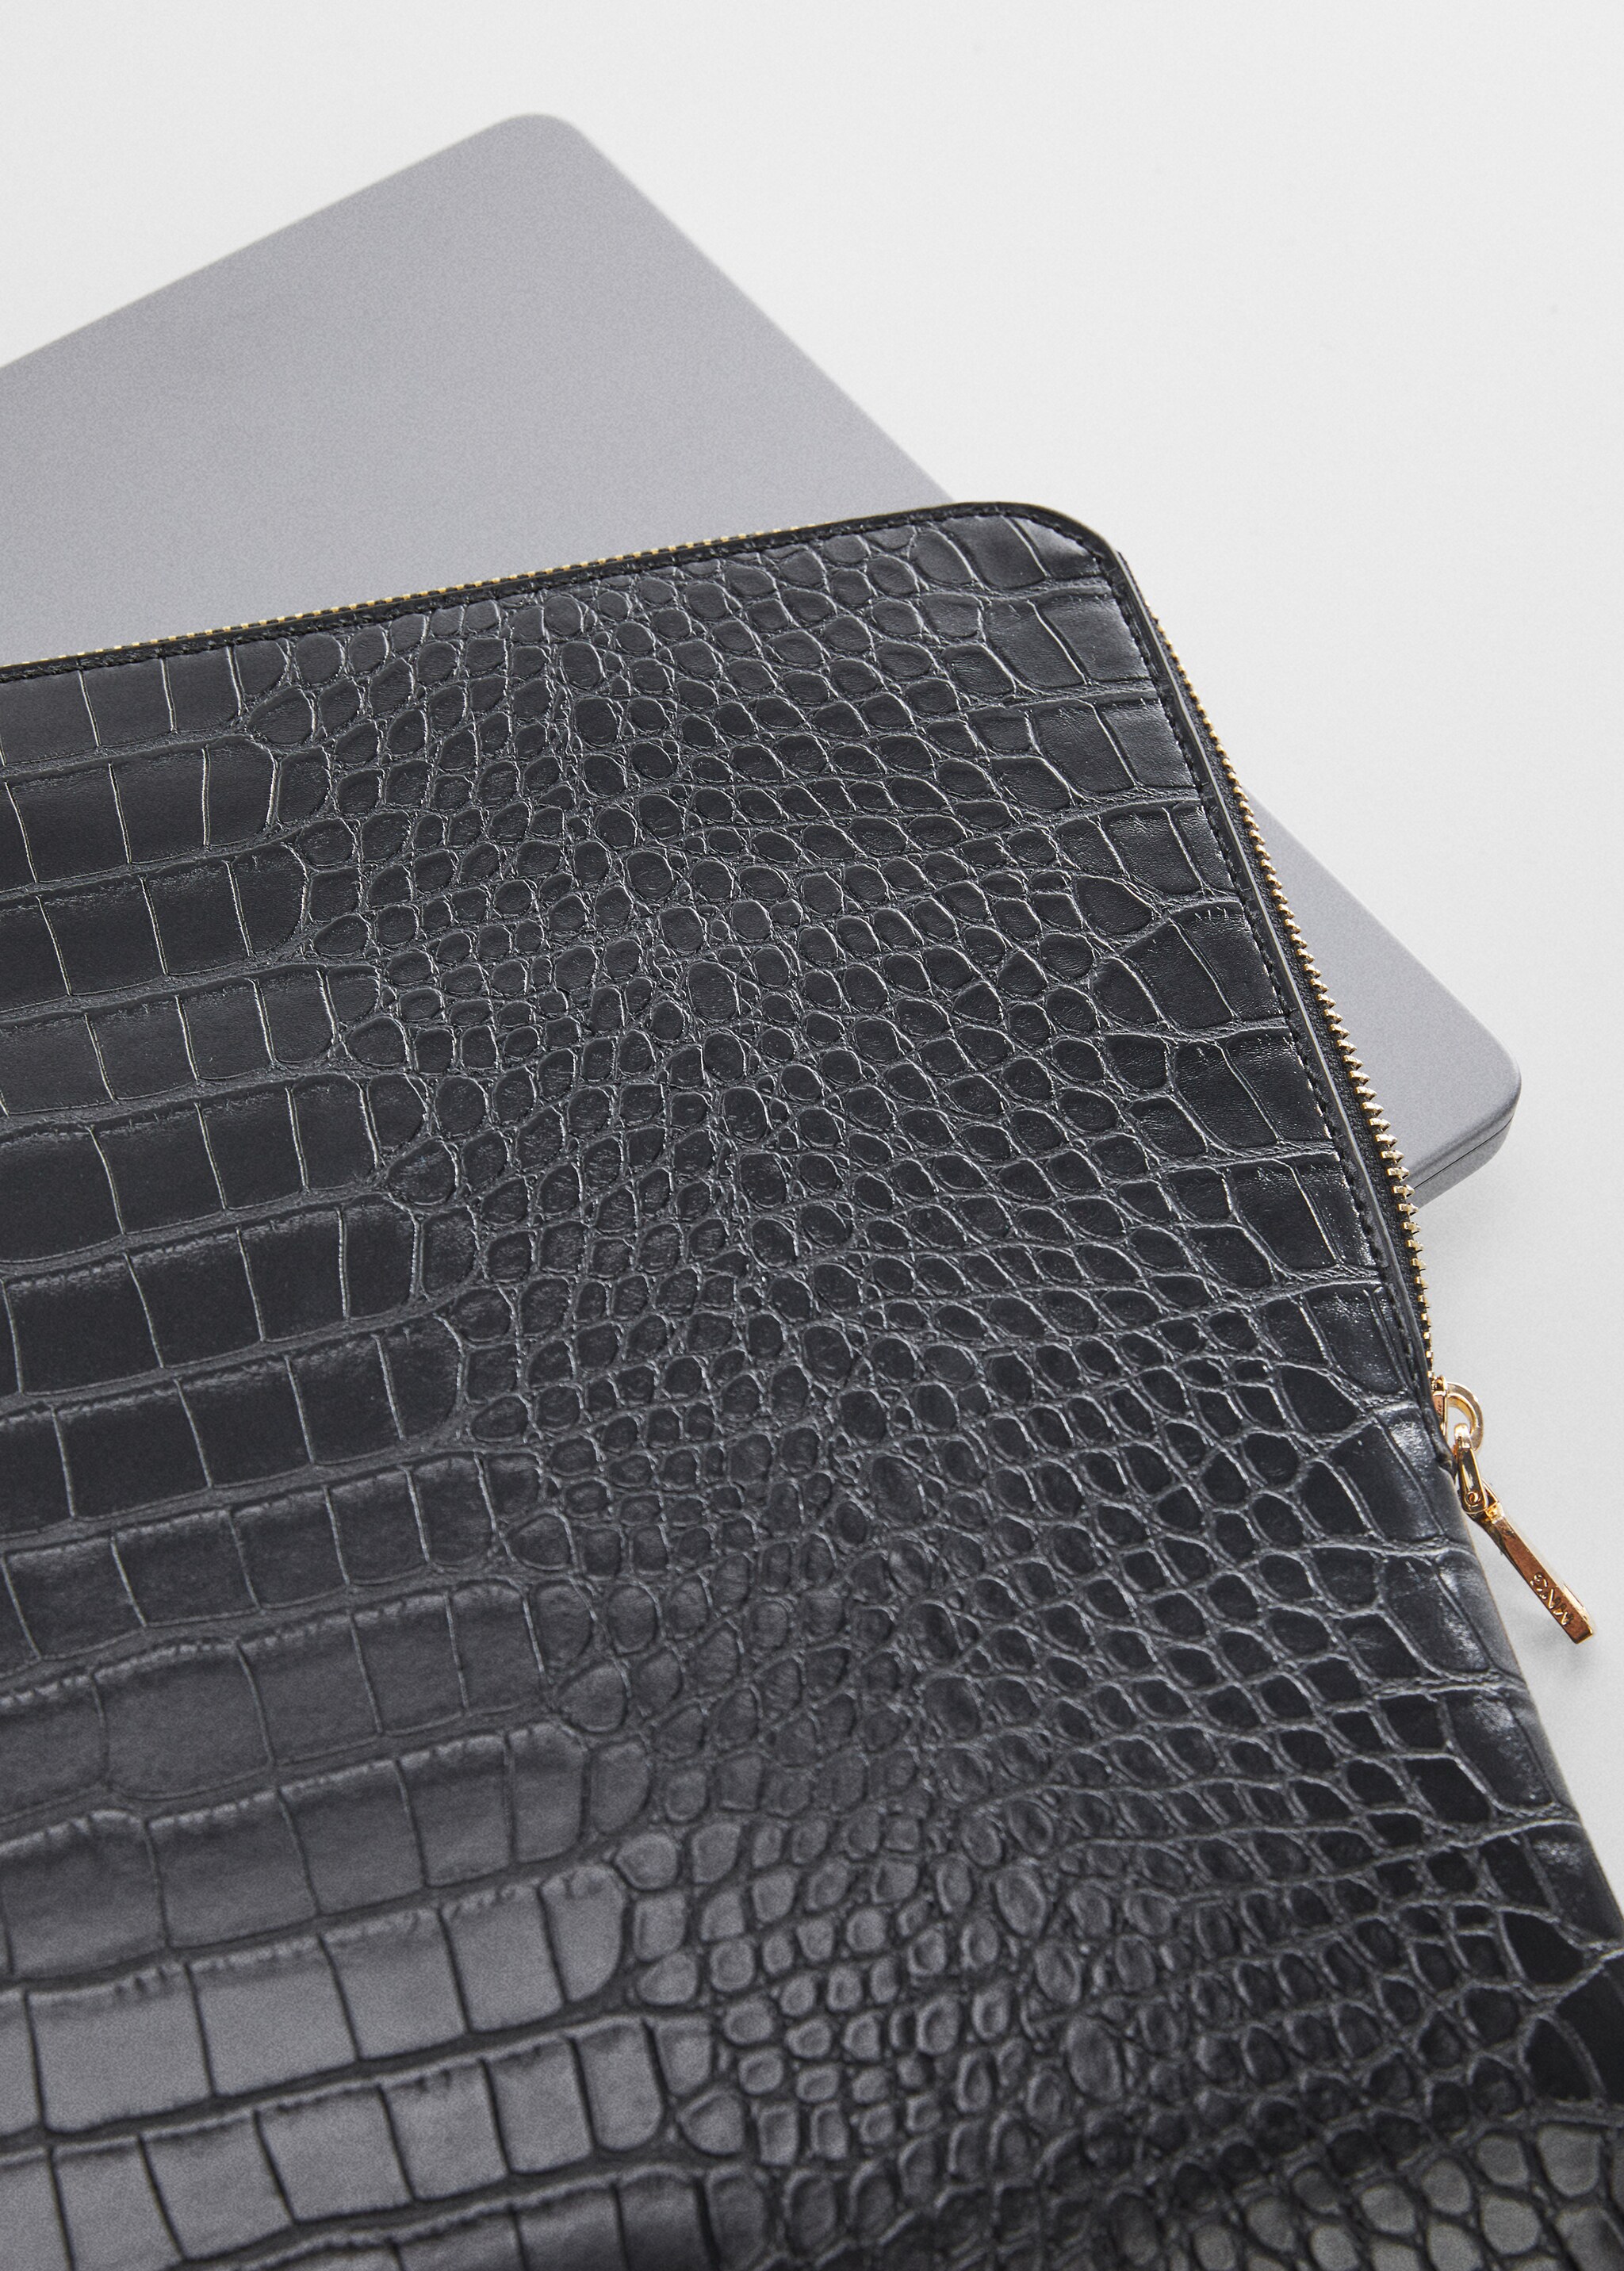 Animal print laptop case - Details of the article 2